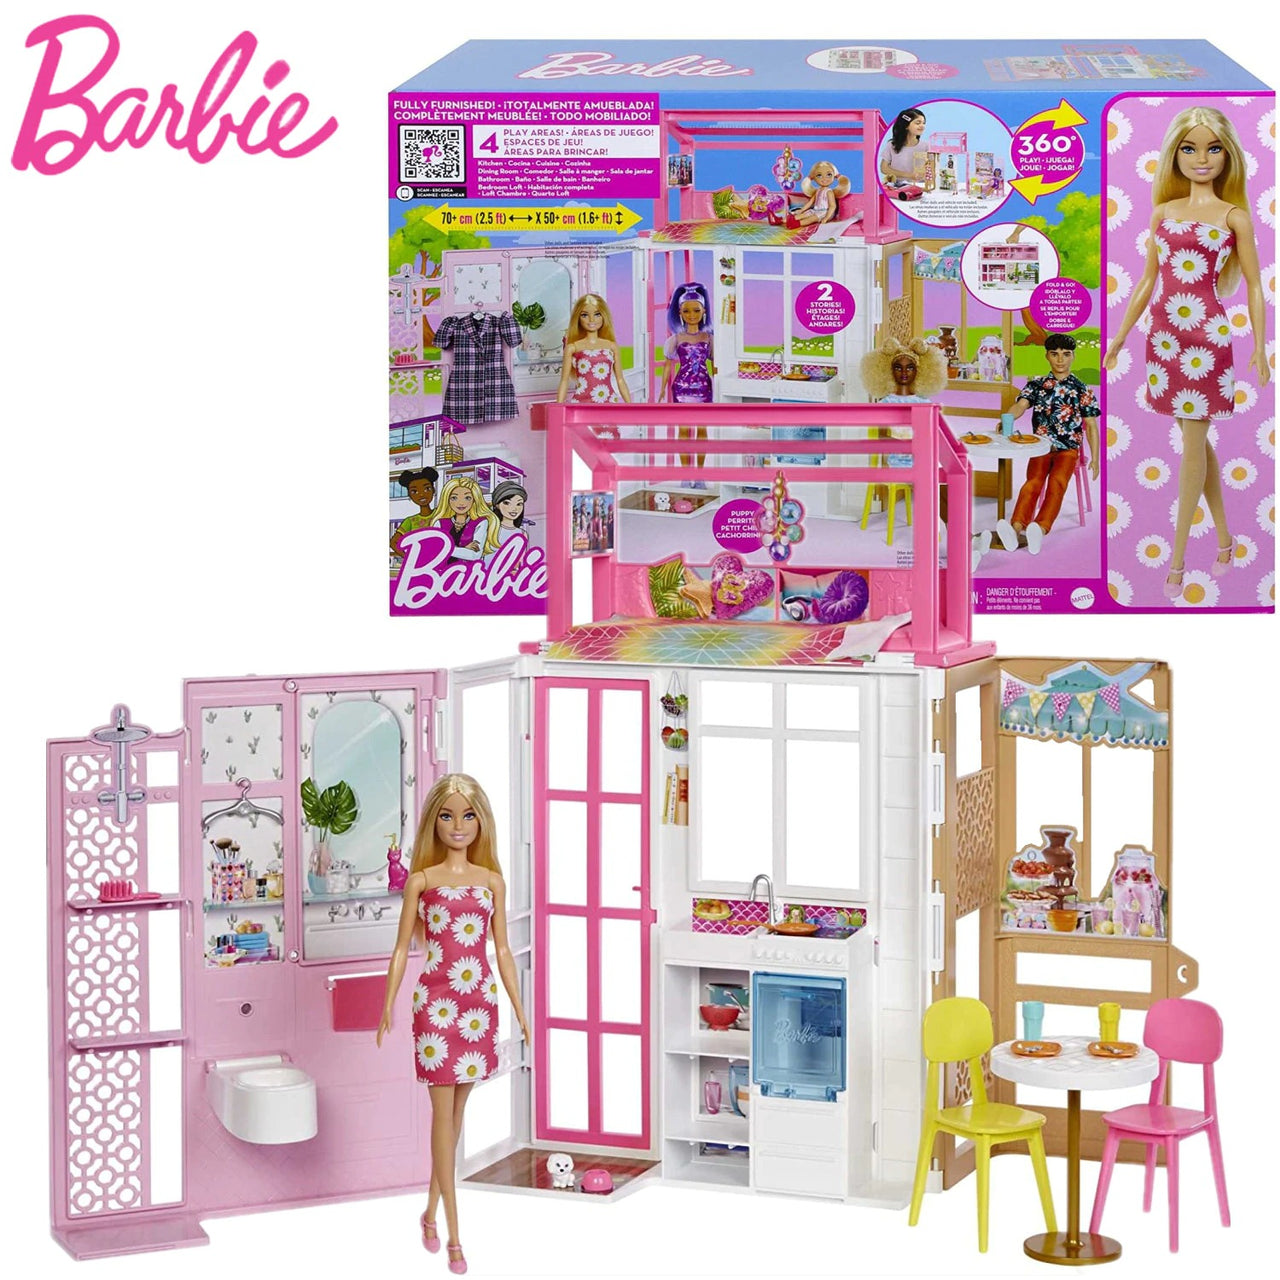 Barbie Play House Toys for Girls